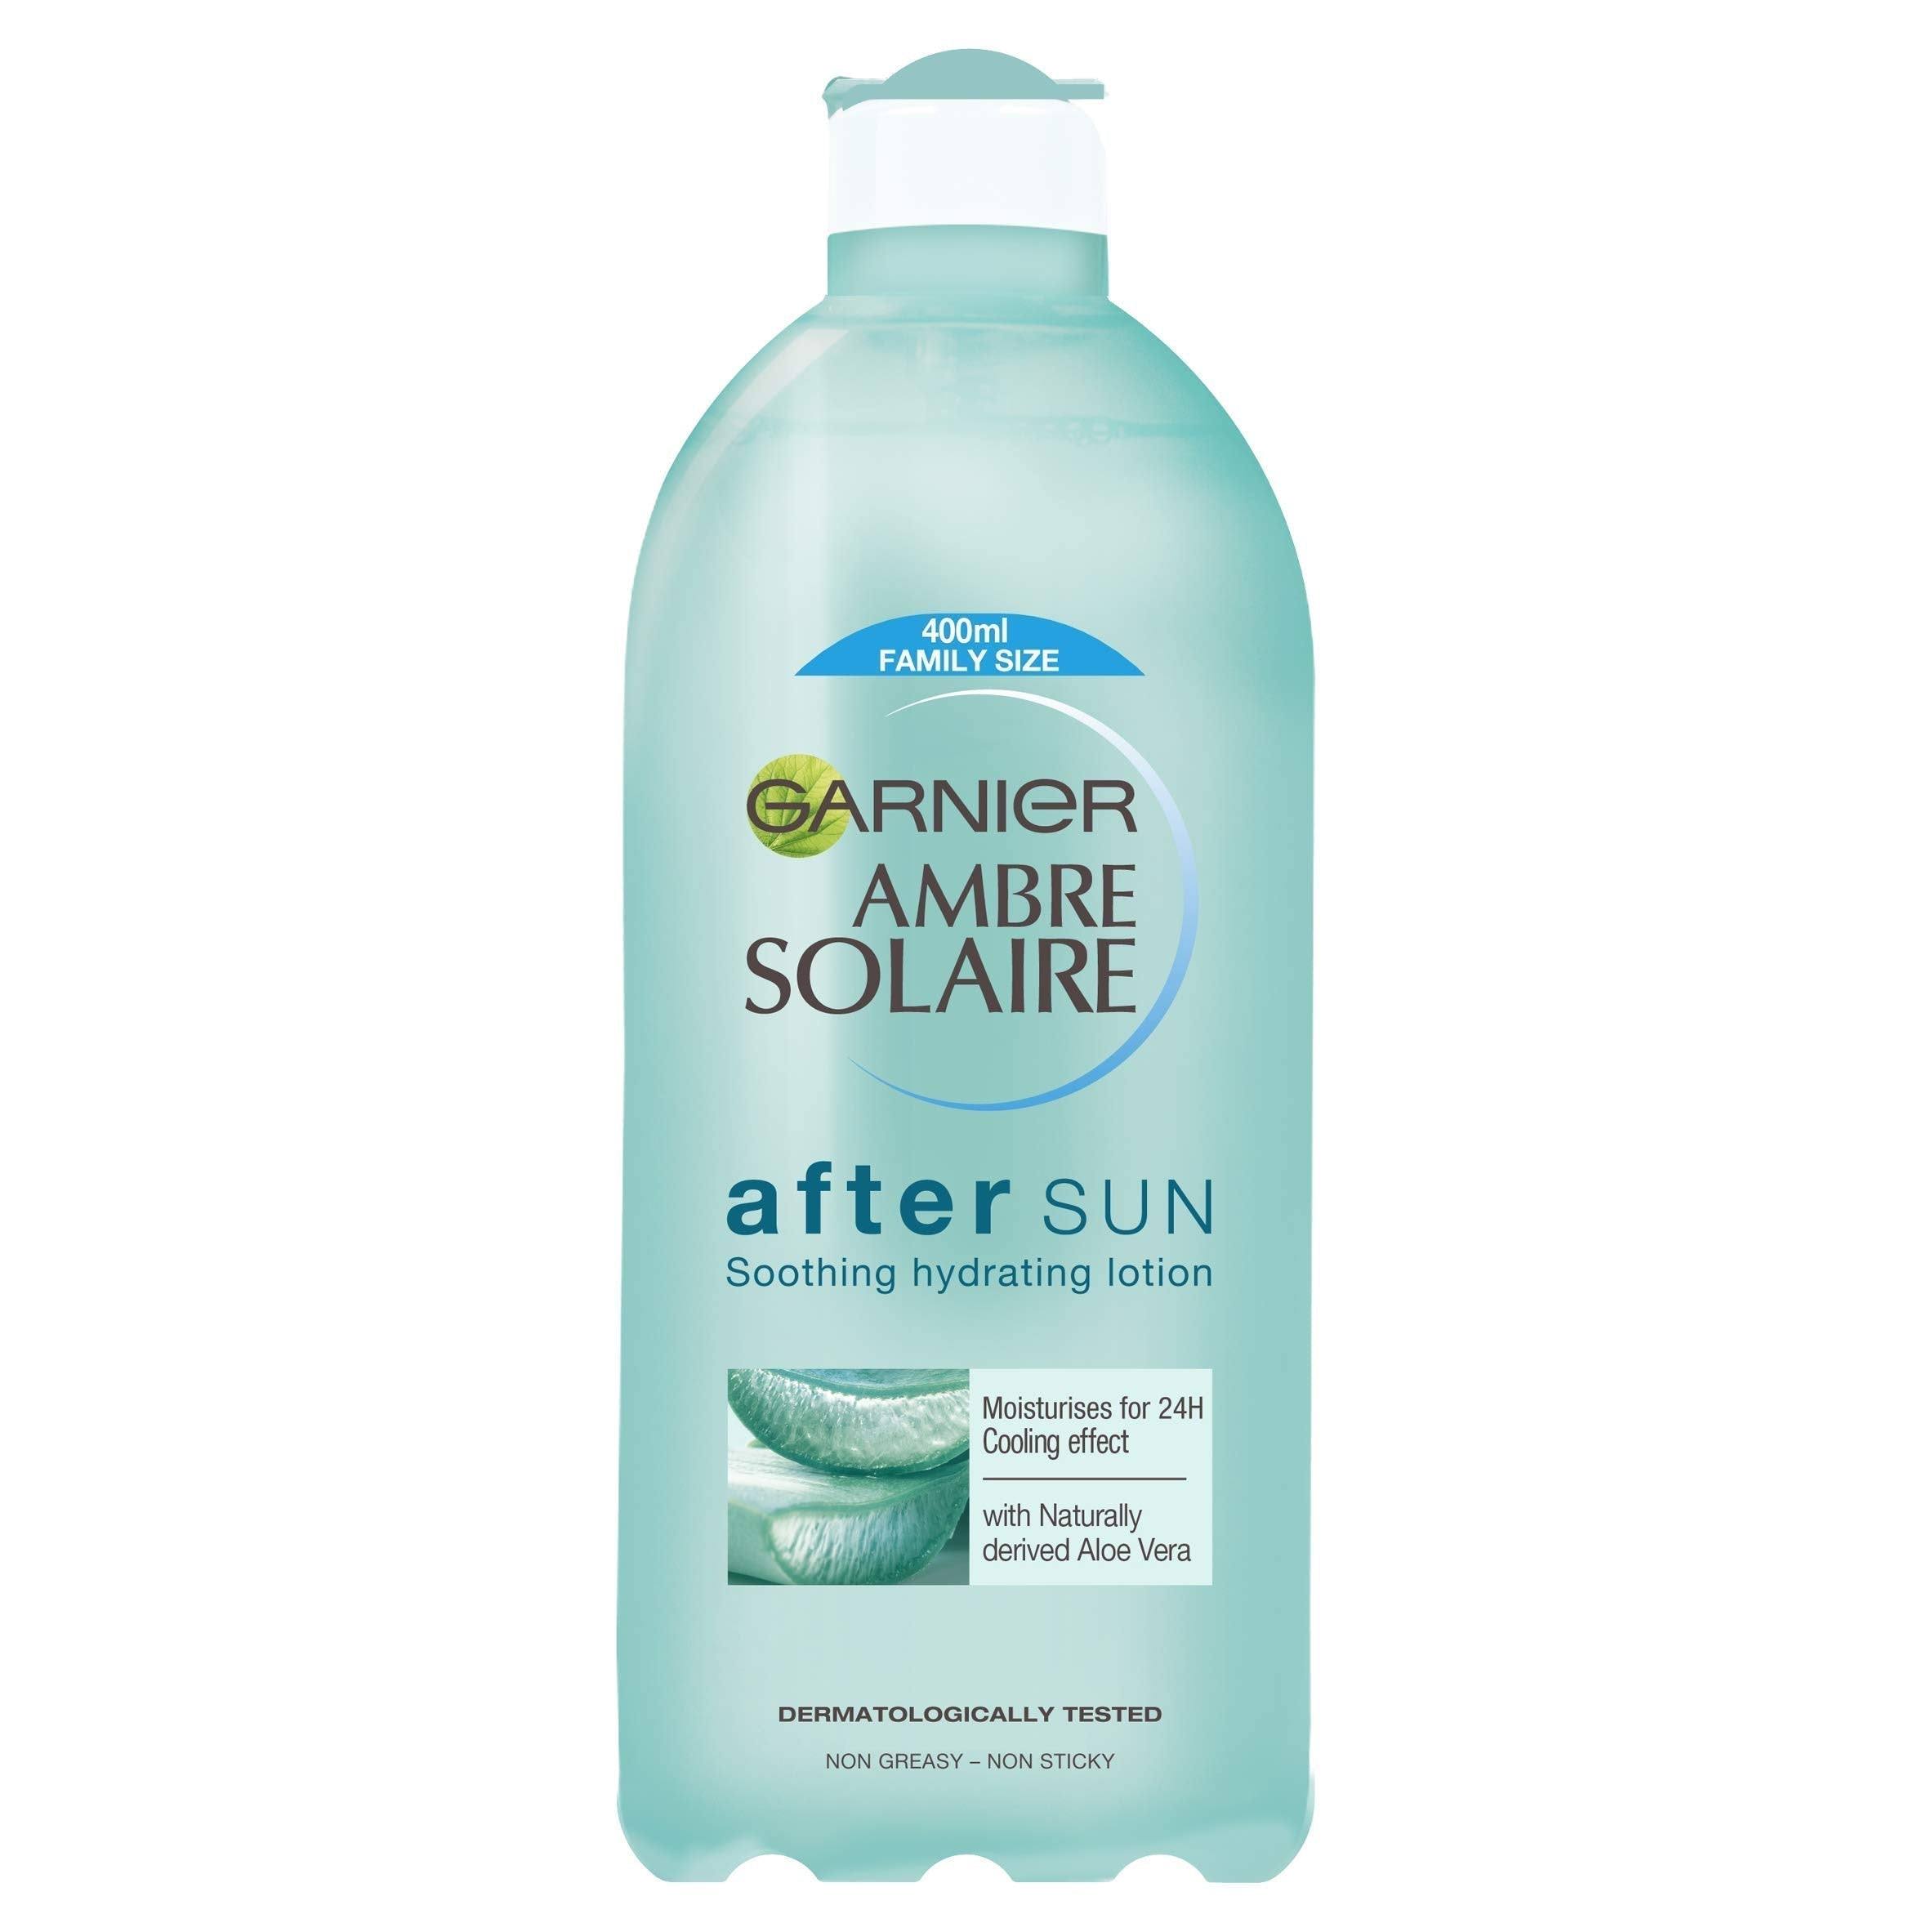 Ambre Solaire Hydrating Soothing After Sun Lotion - 400ml